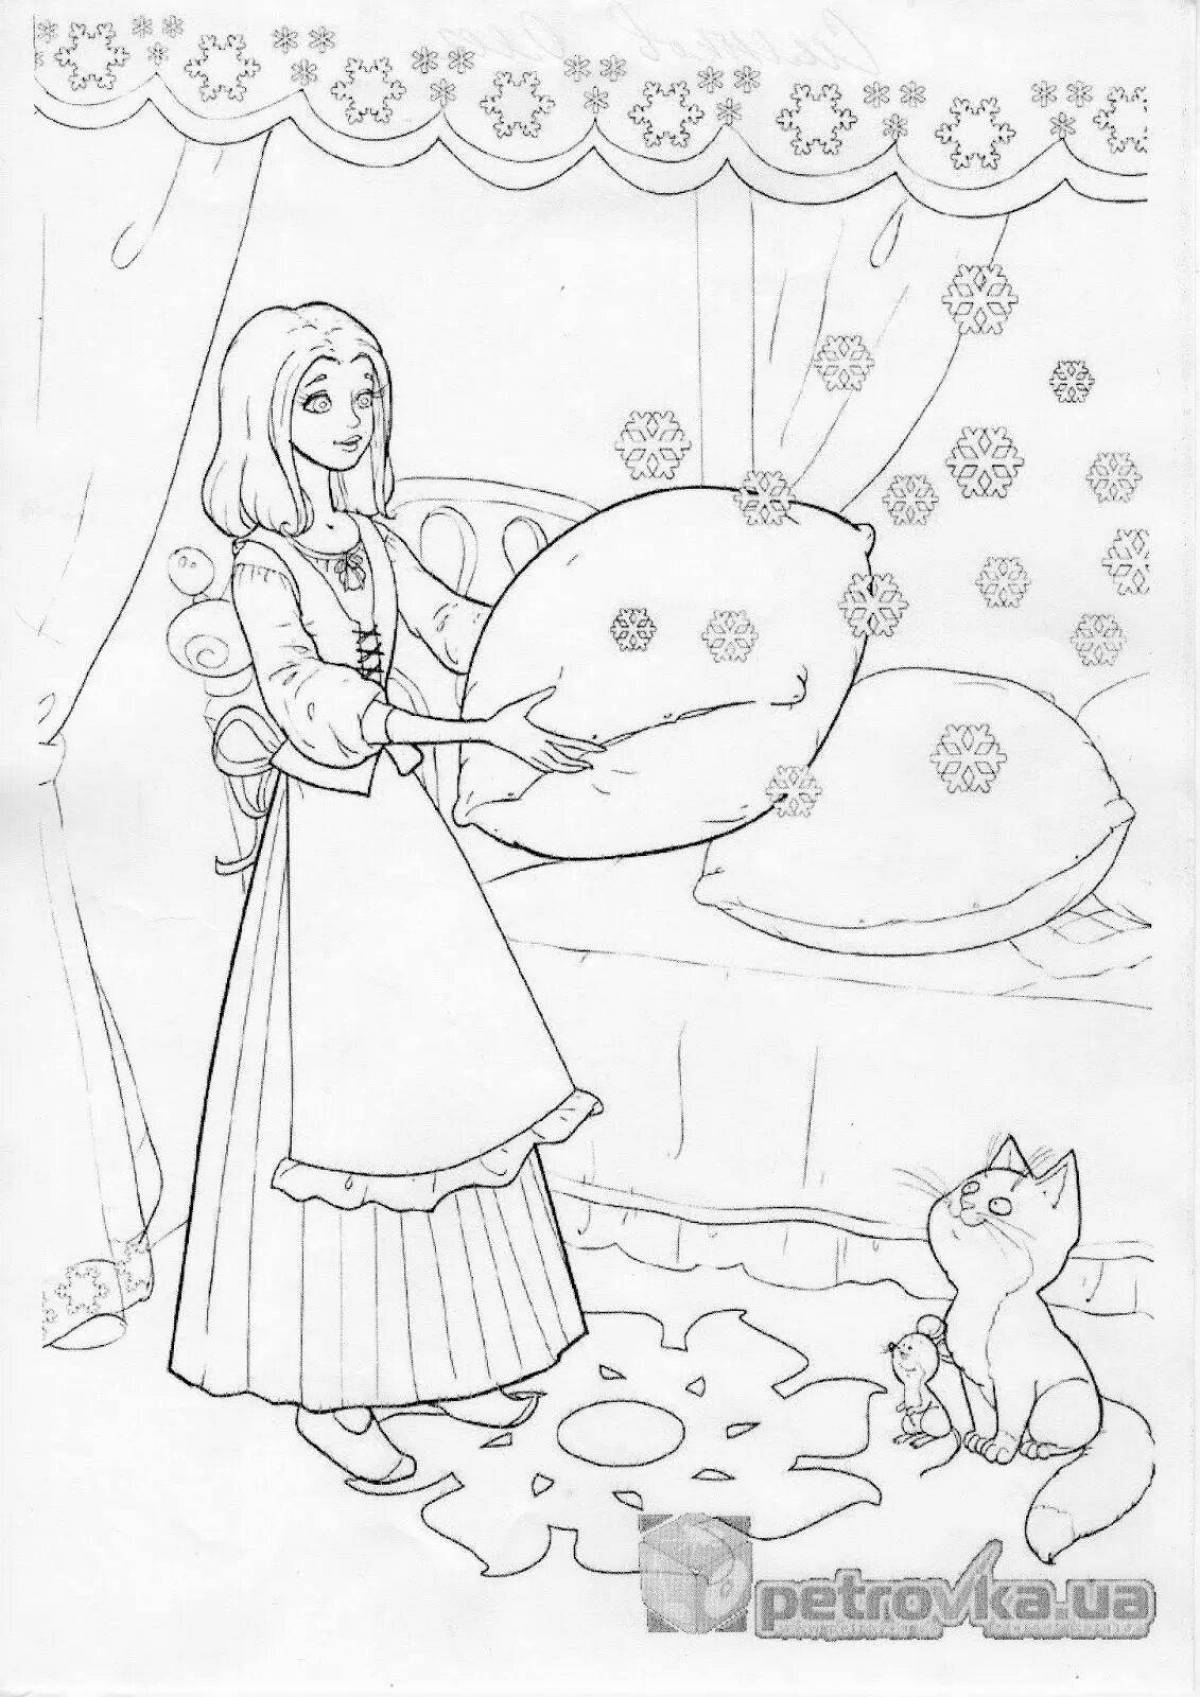 Charming blizzard coloring book